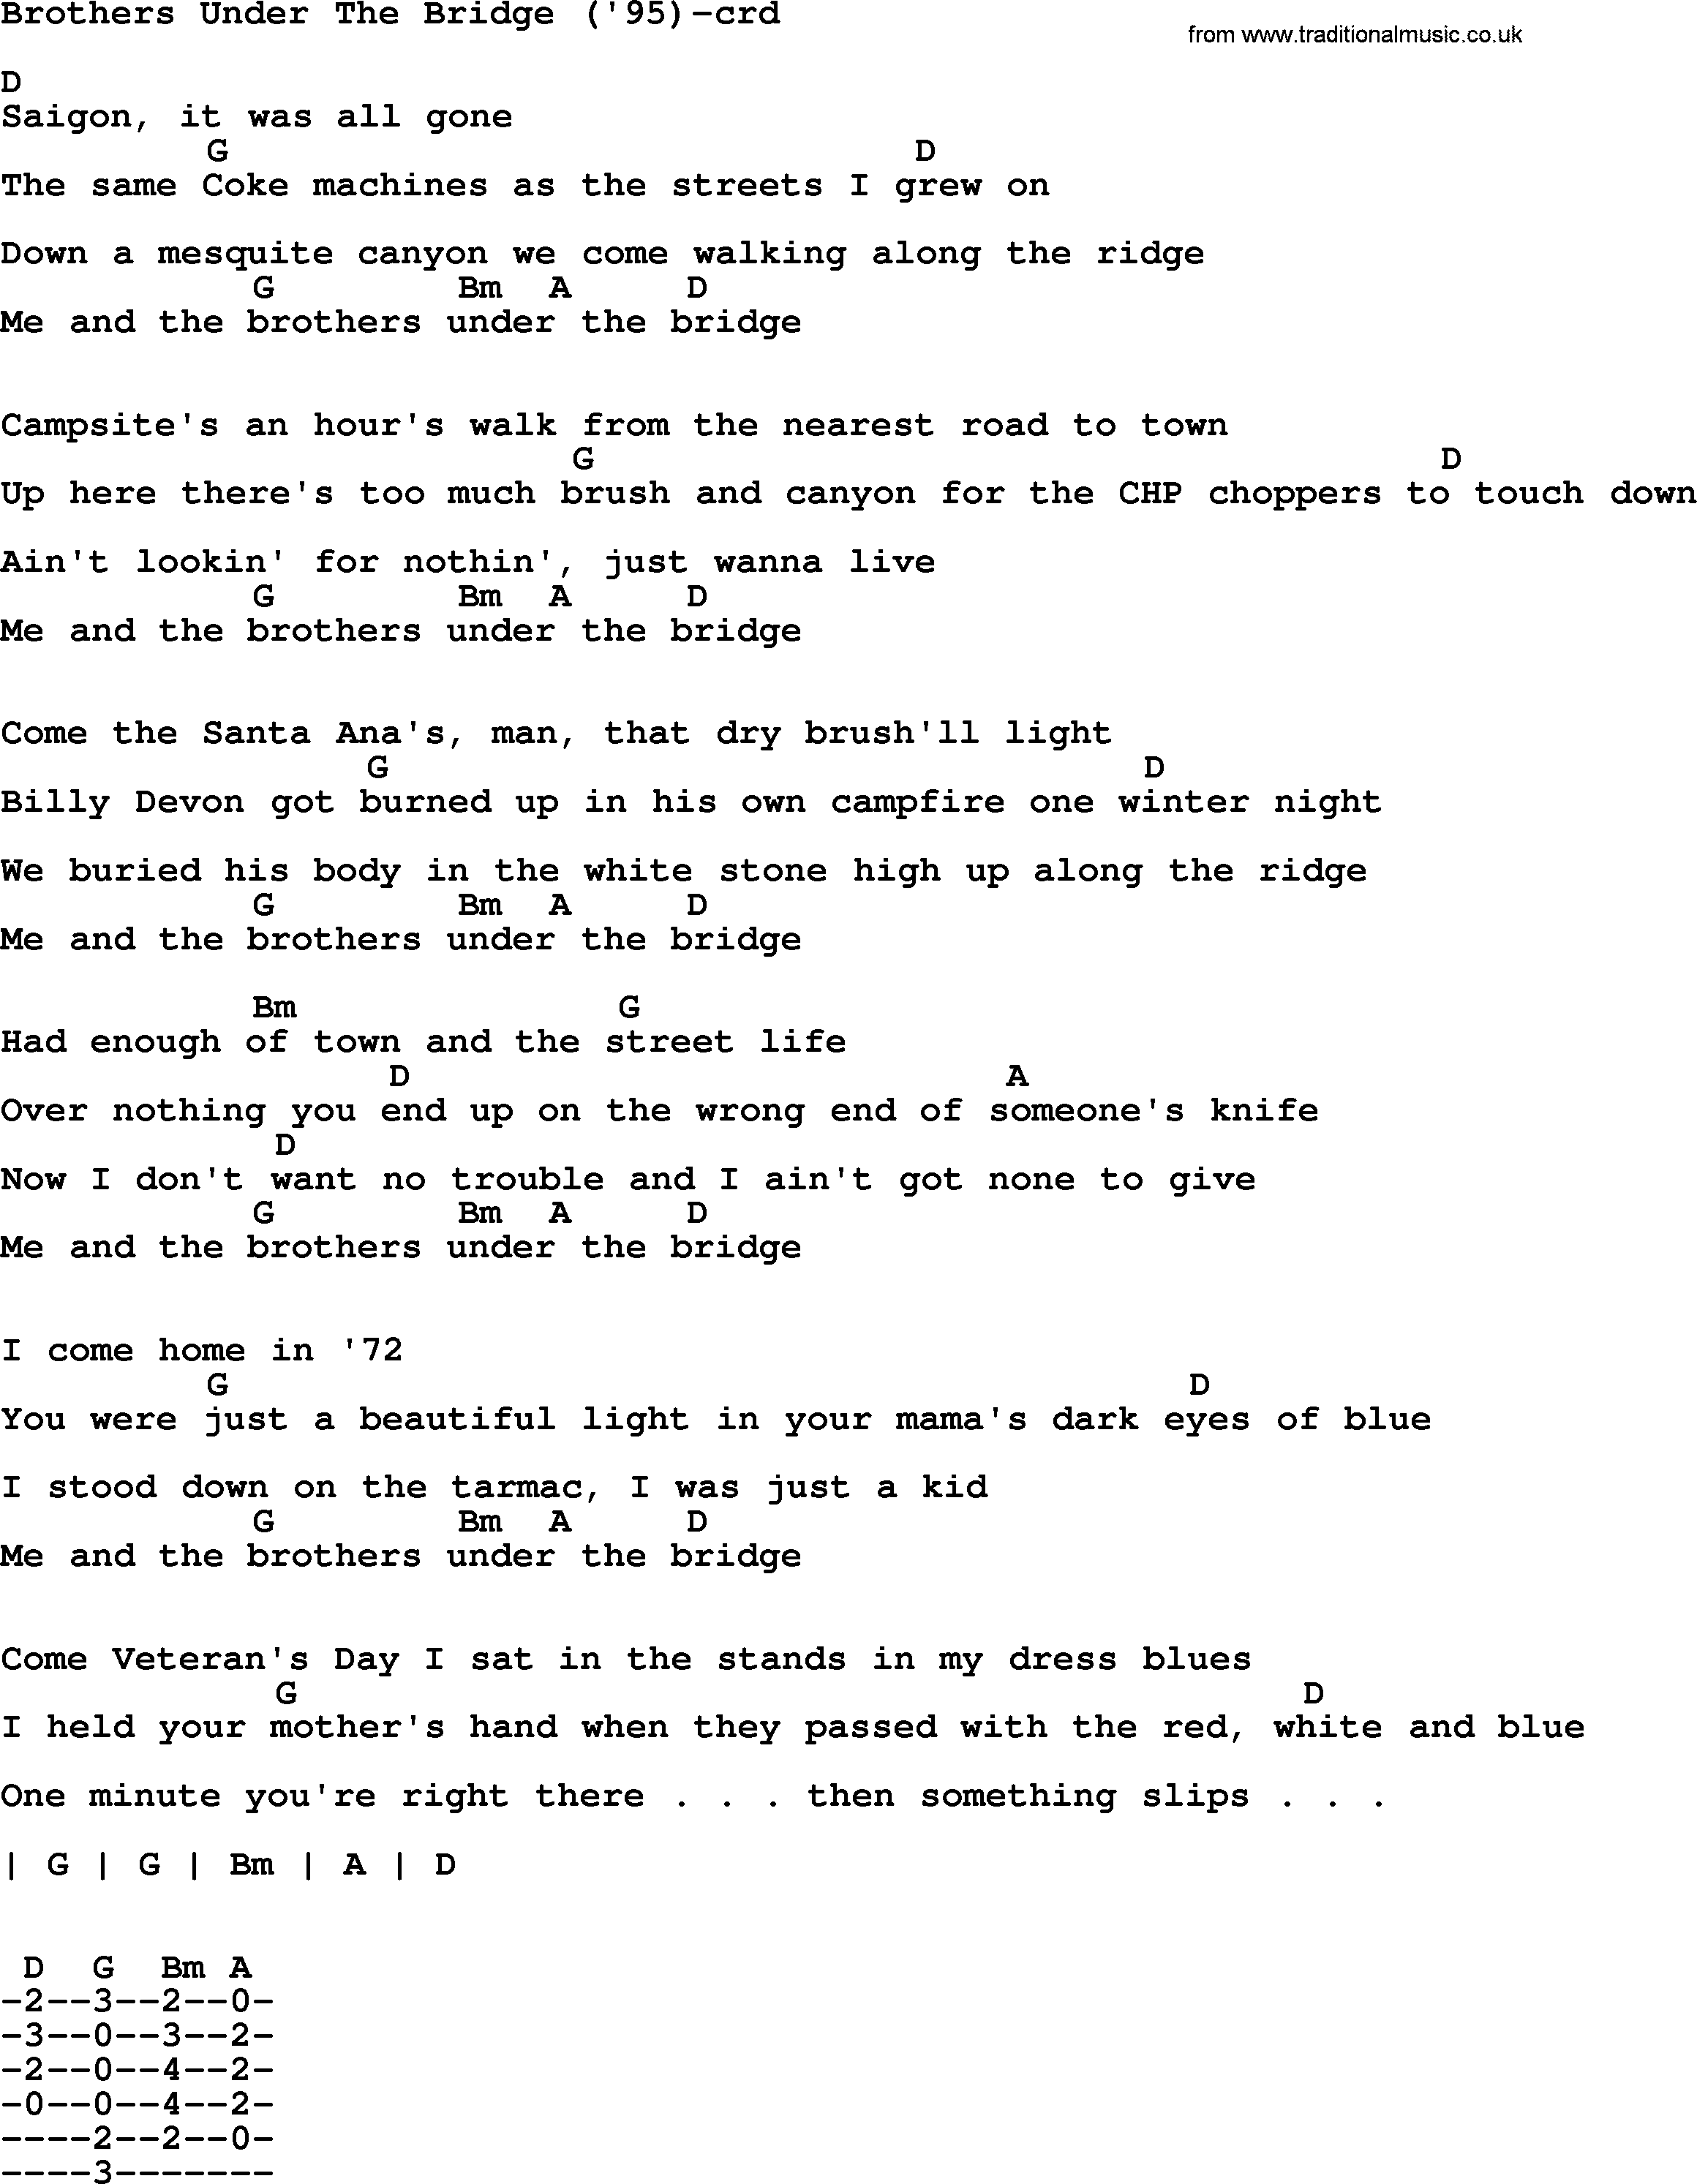 Bruce Springsteen song: Brothers Under The Bridge('95), lyrics and chords